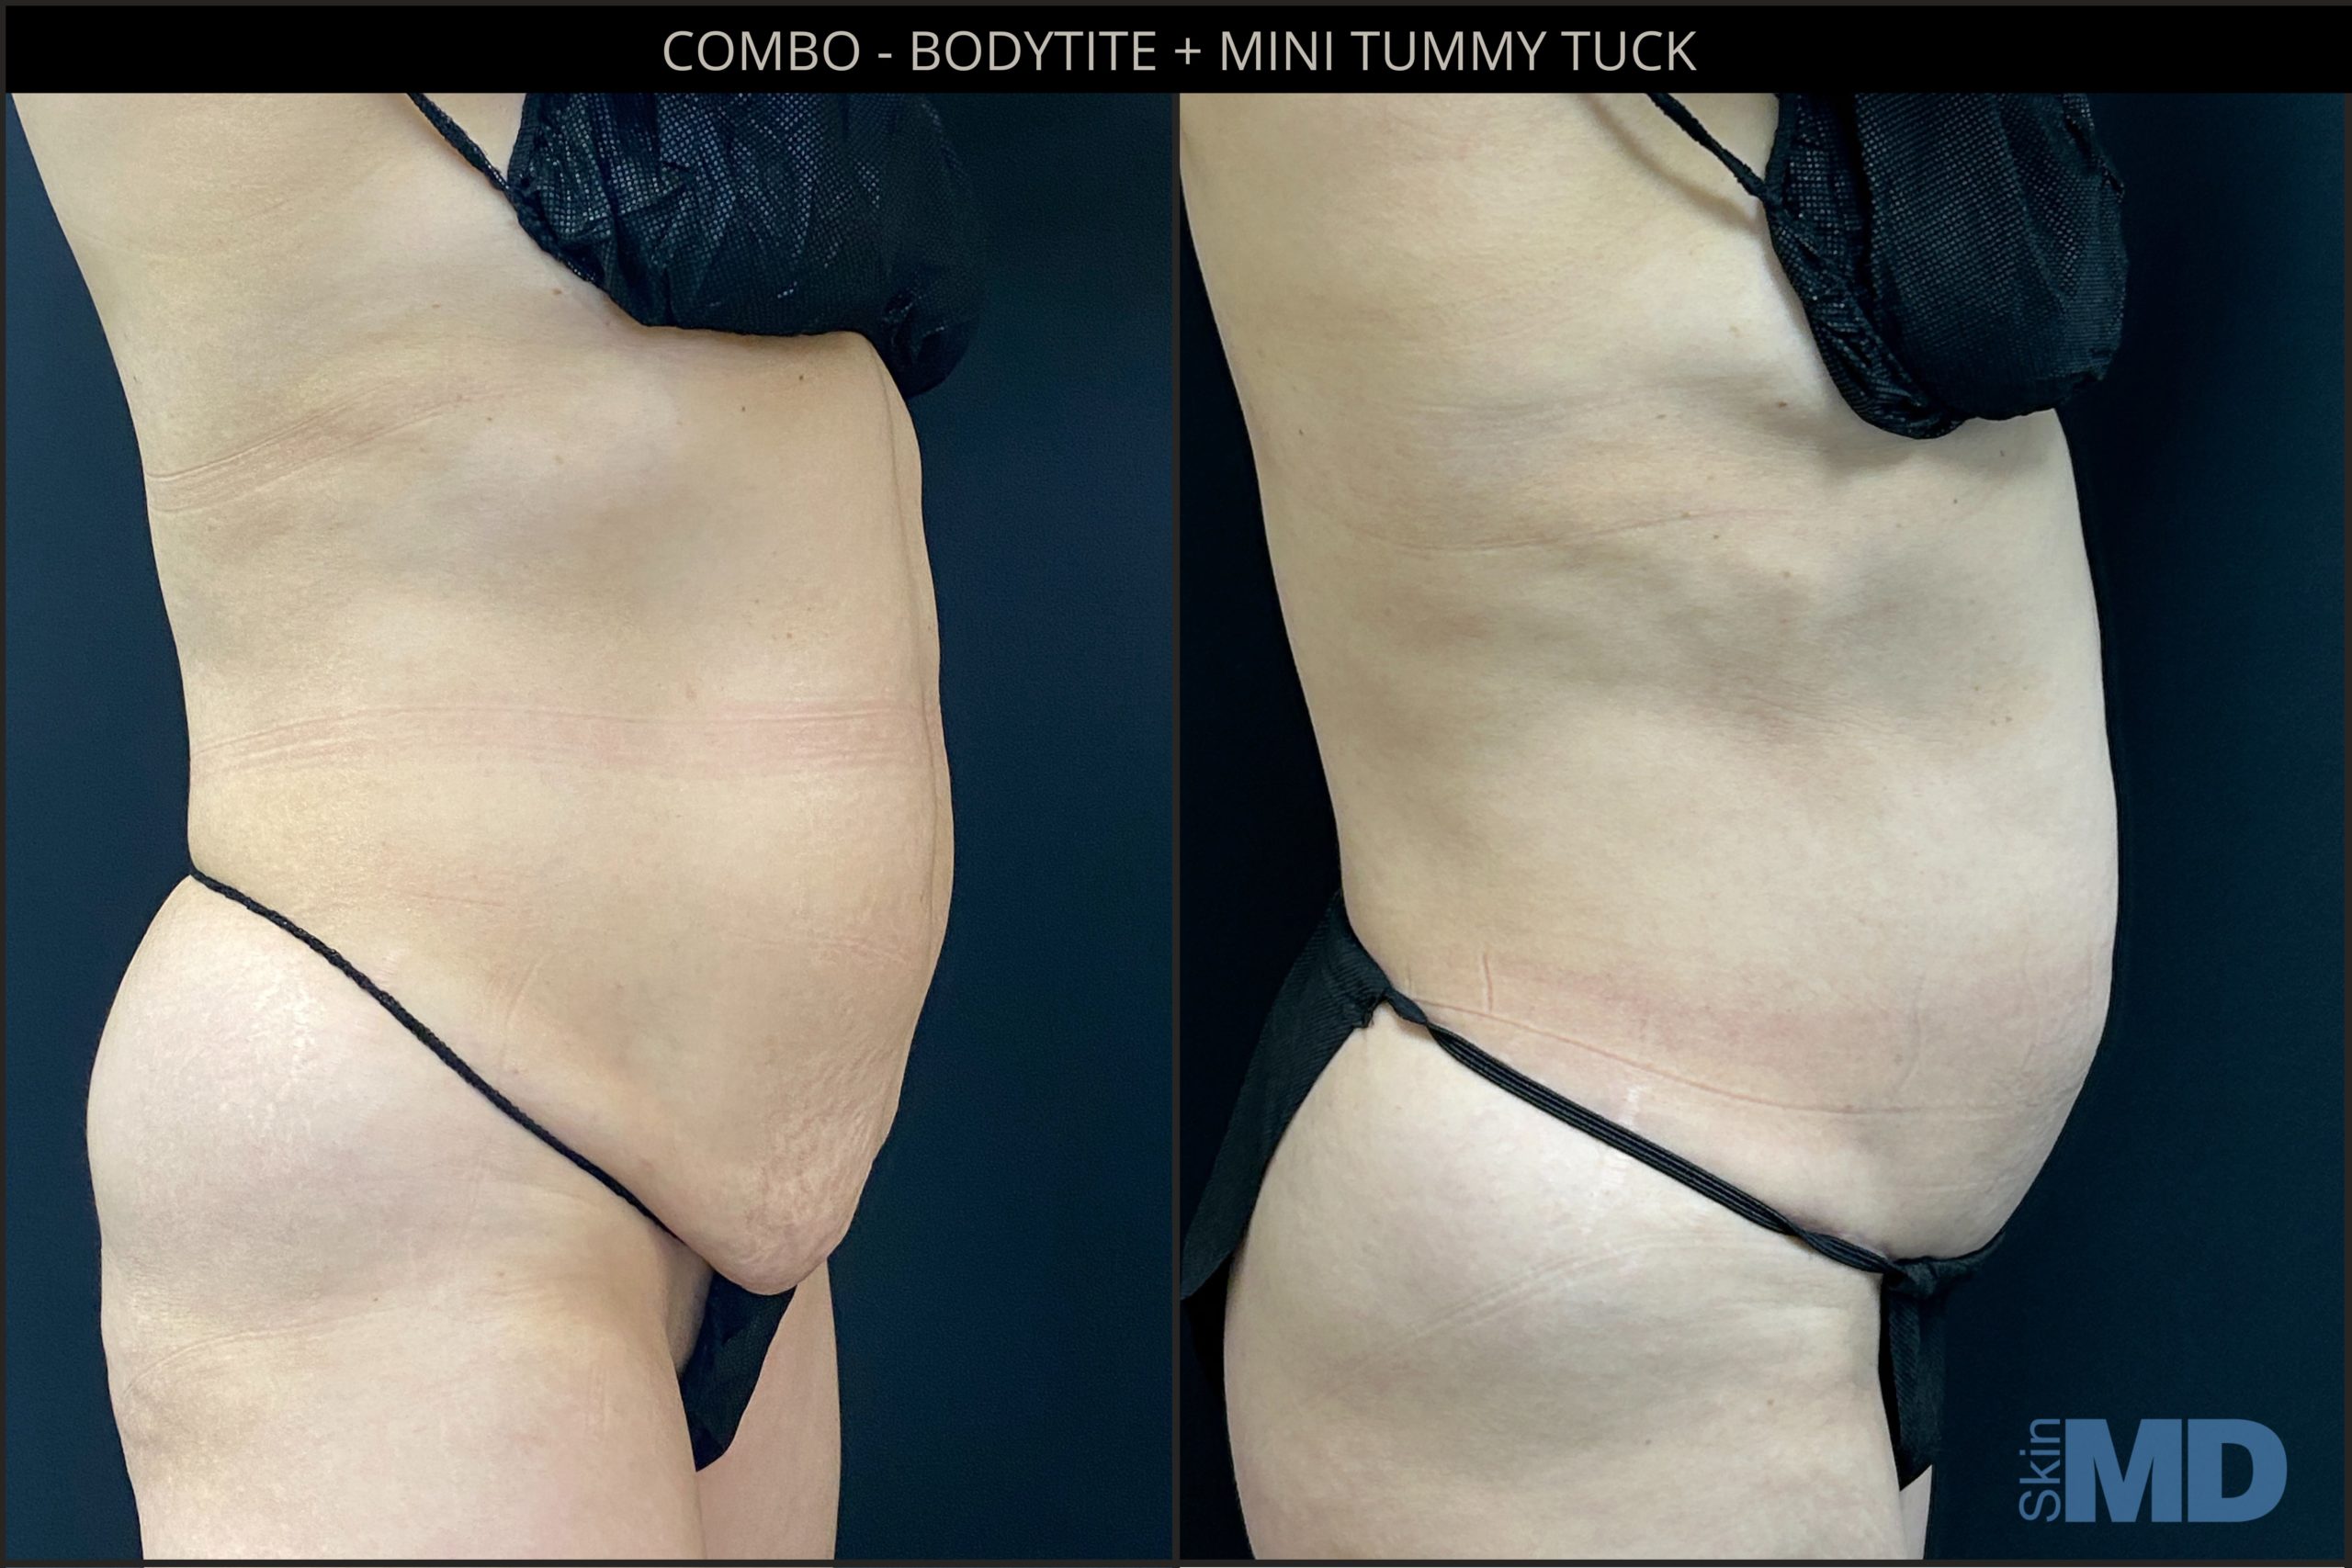 Before and after combo Bodytite and tummy tuck treatments